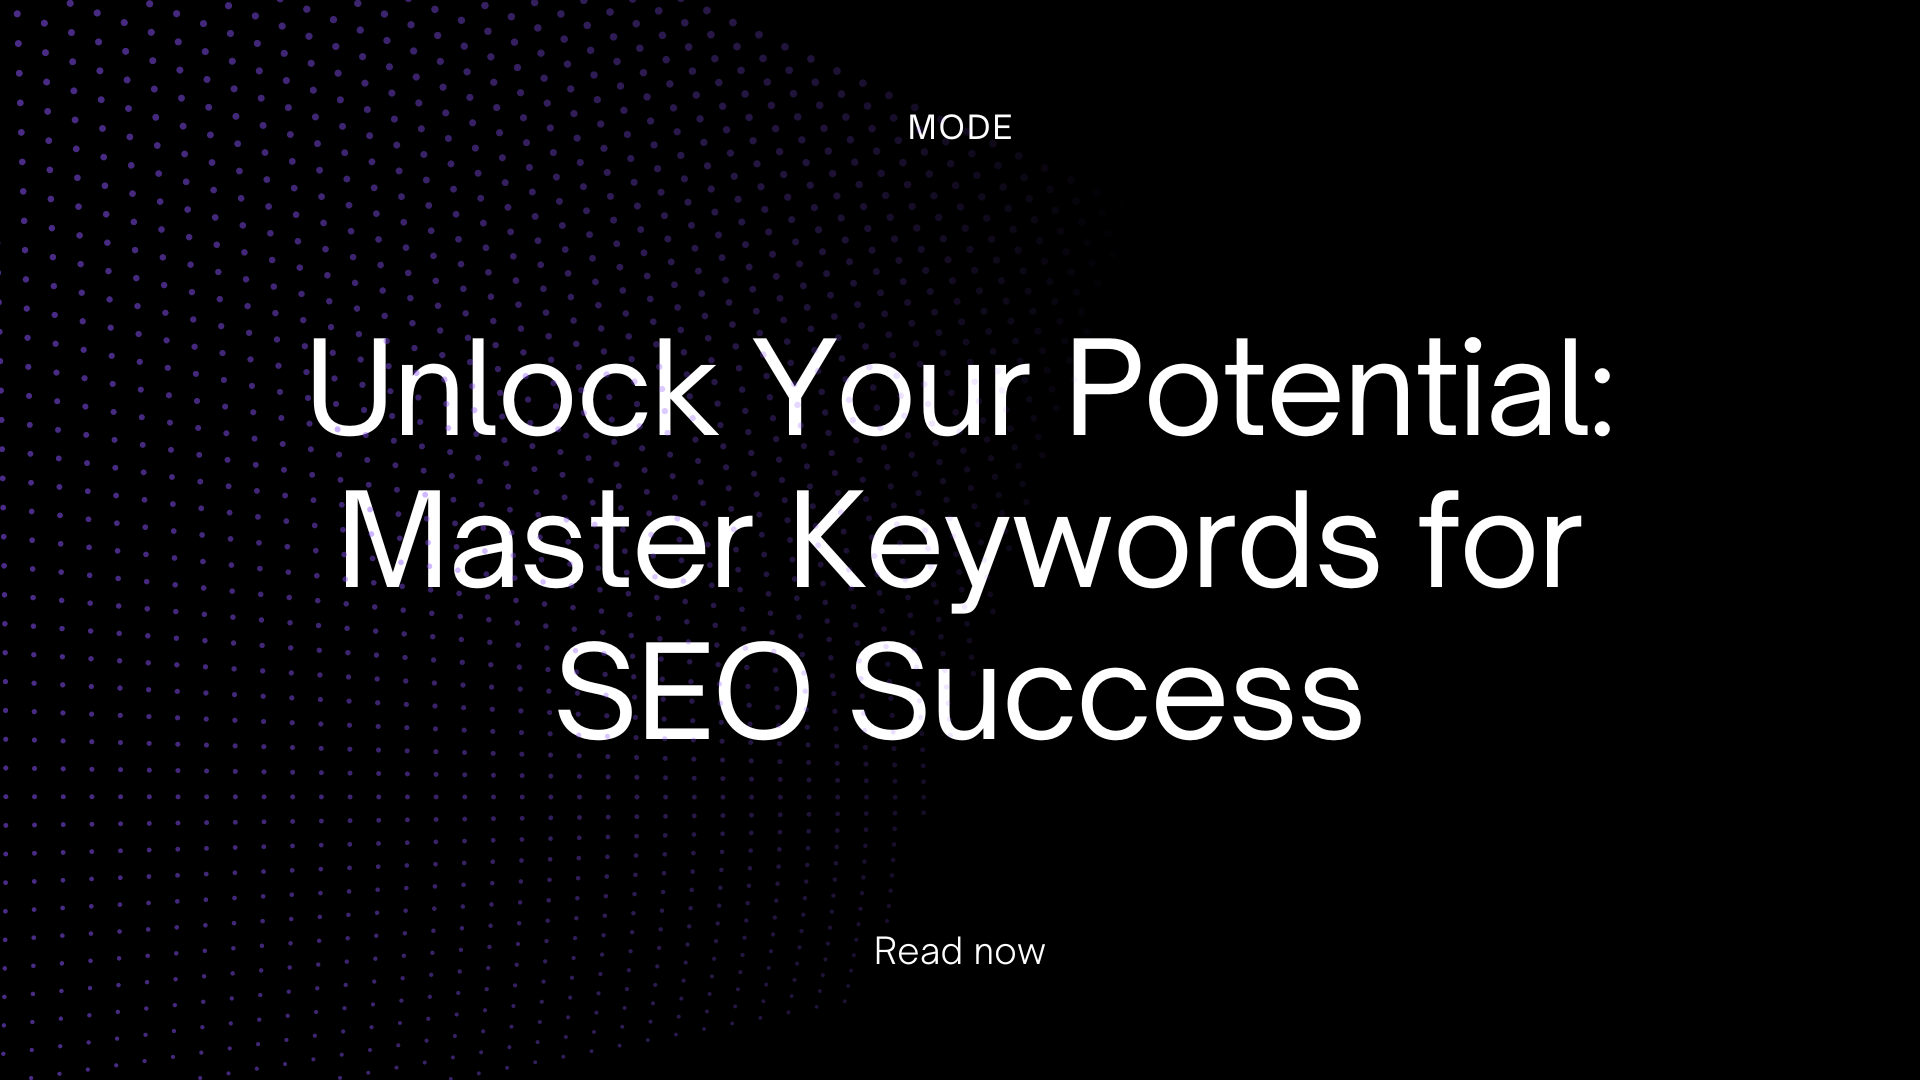 Unlock Your Potential: Master Keywords for SEO Success